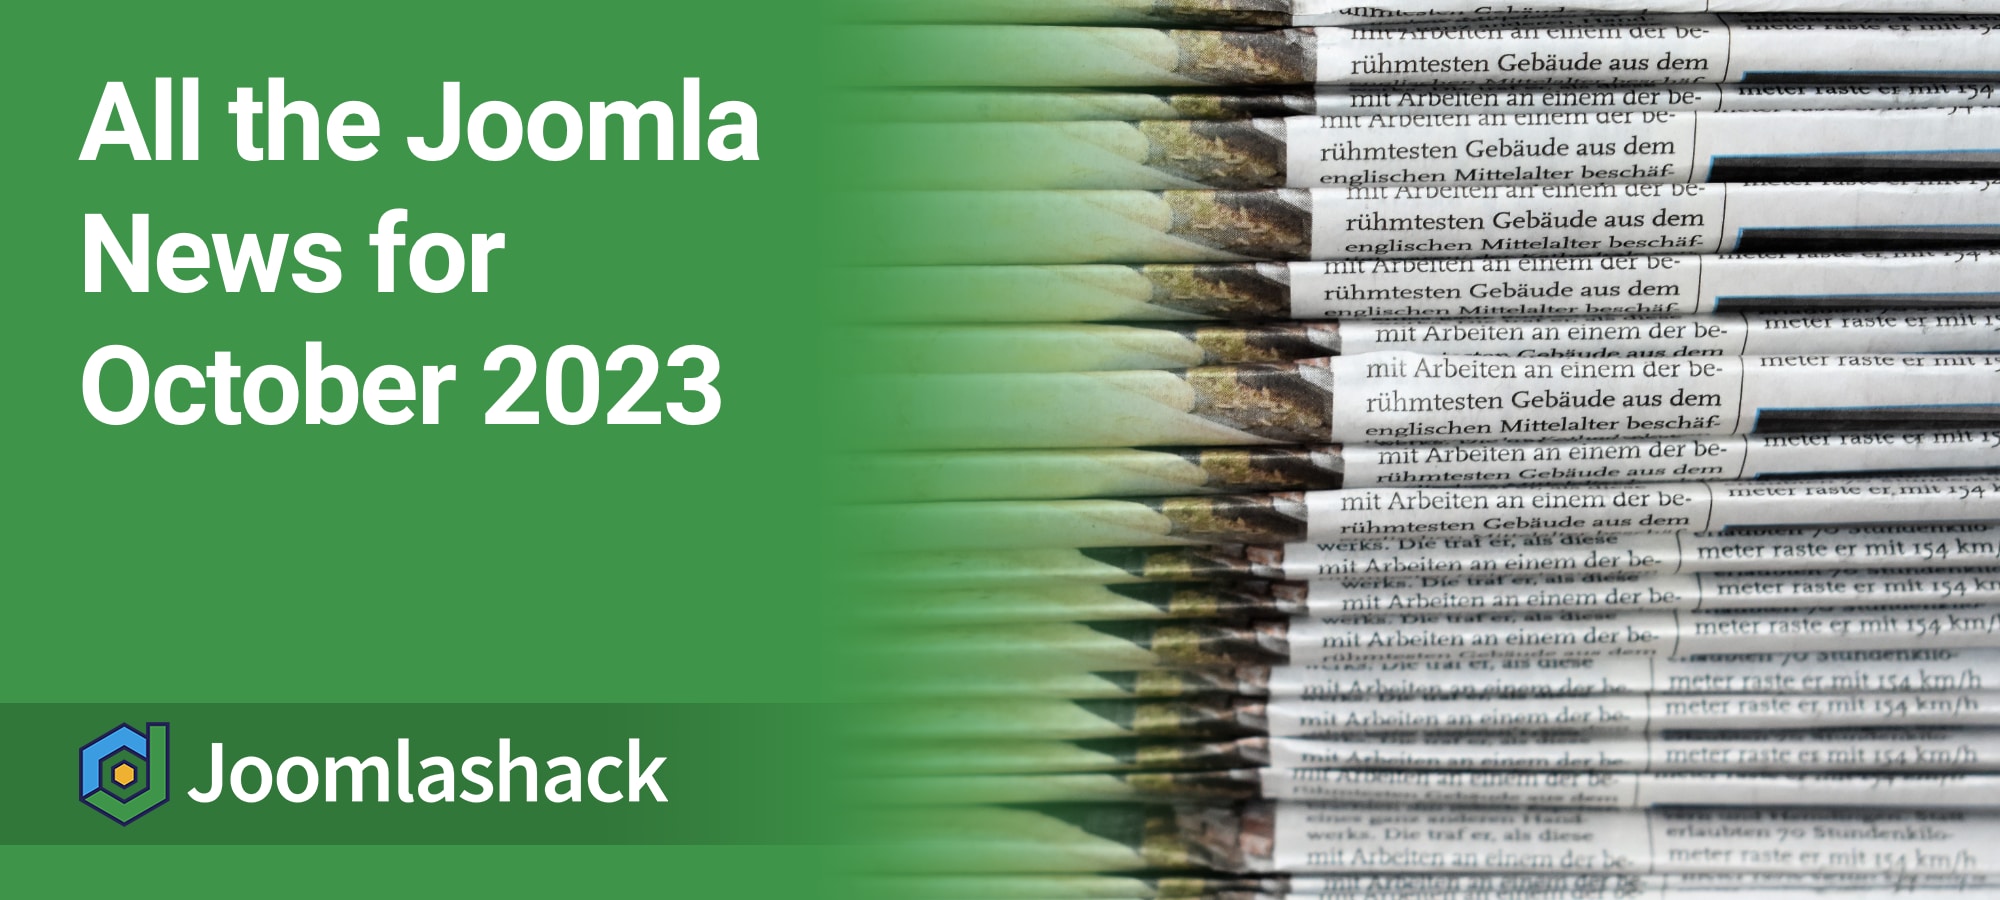 All the Joomla News for October 2023